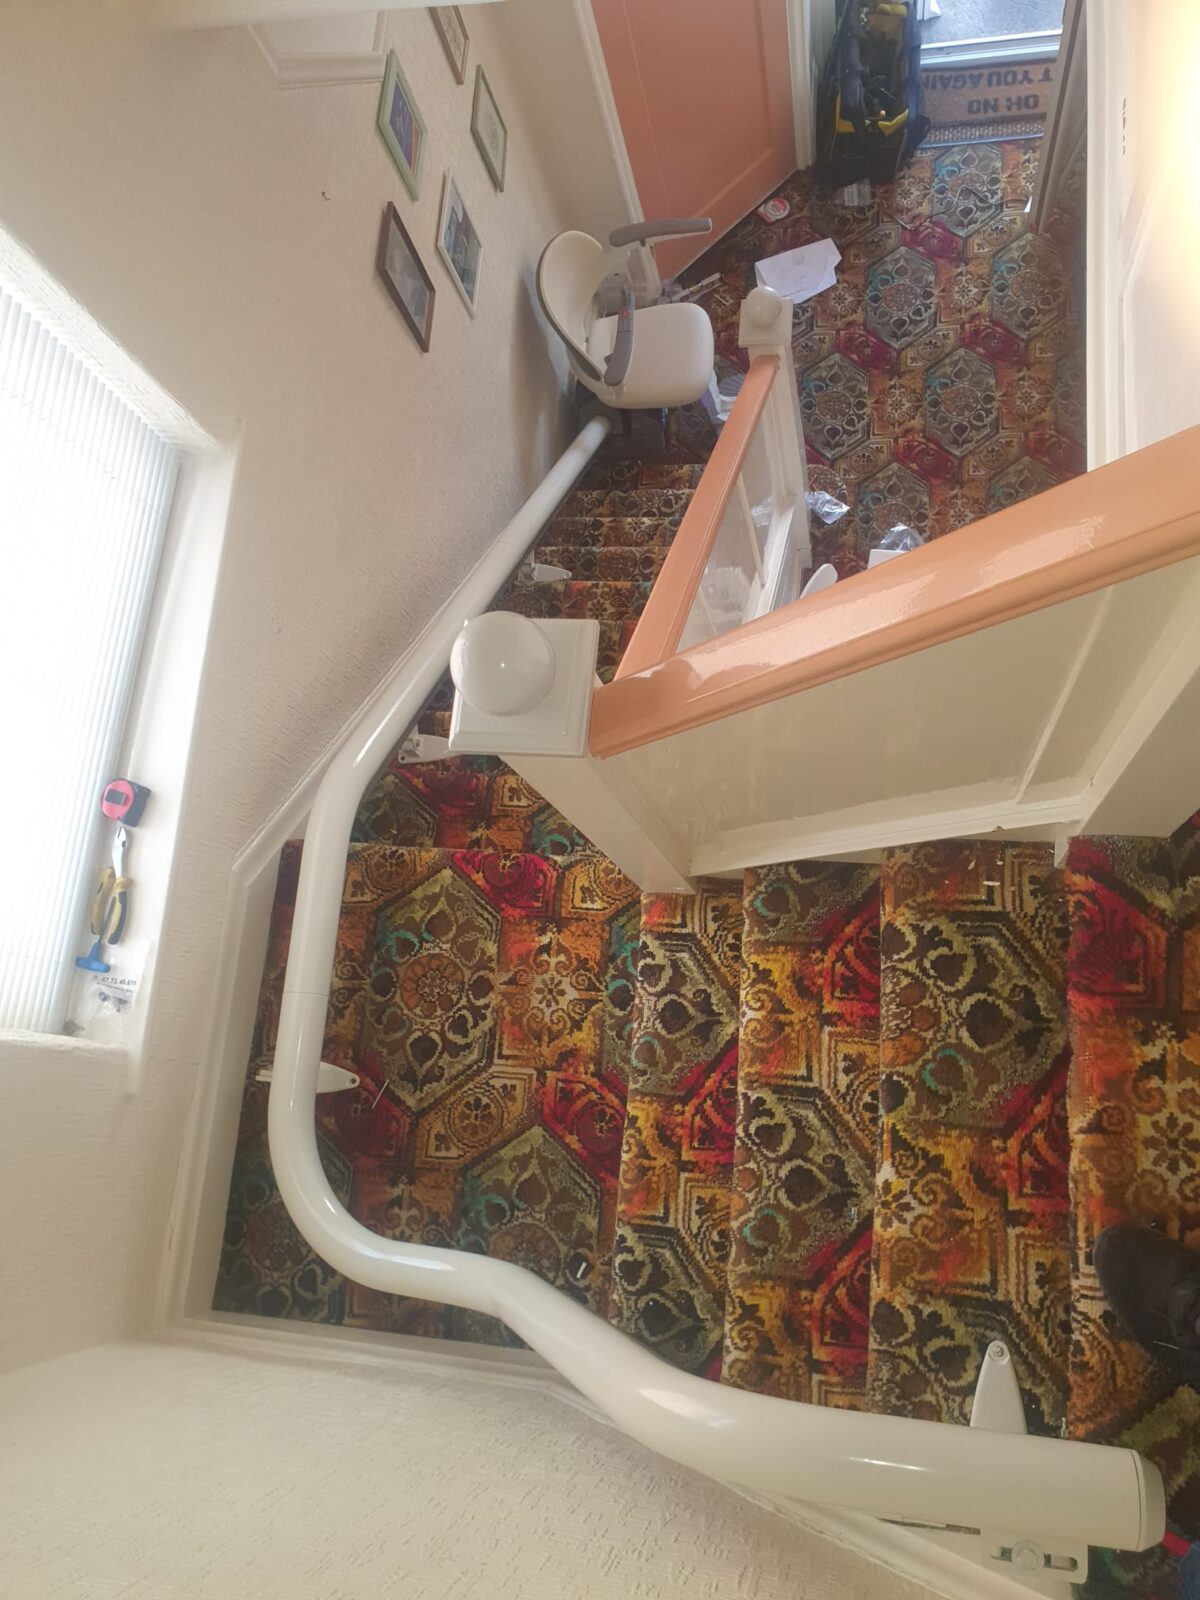 Keeping You Mobile: A Guide to Stairlift Repair, Service & Removal from KSK Stairlifts